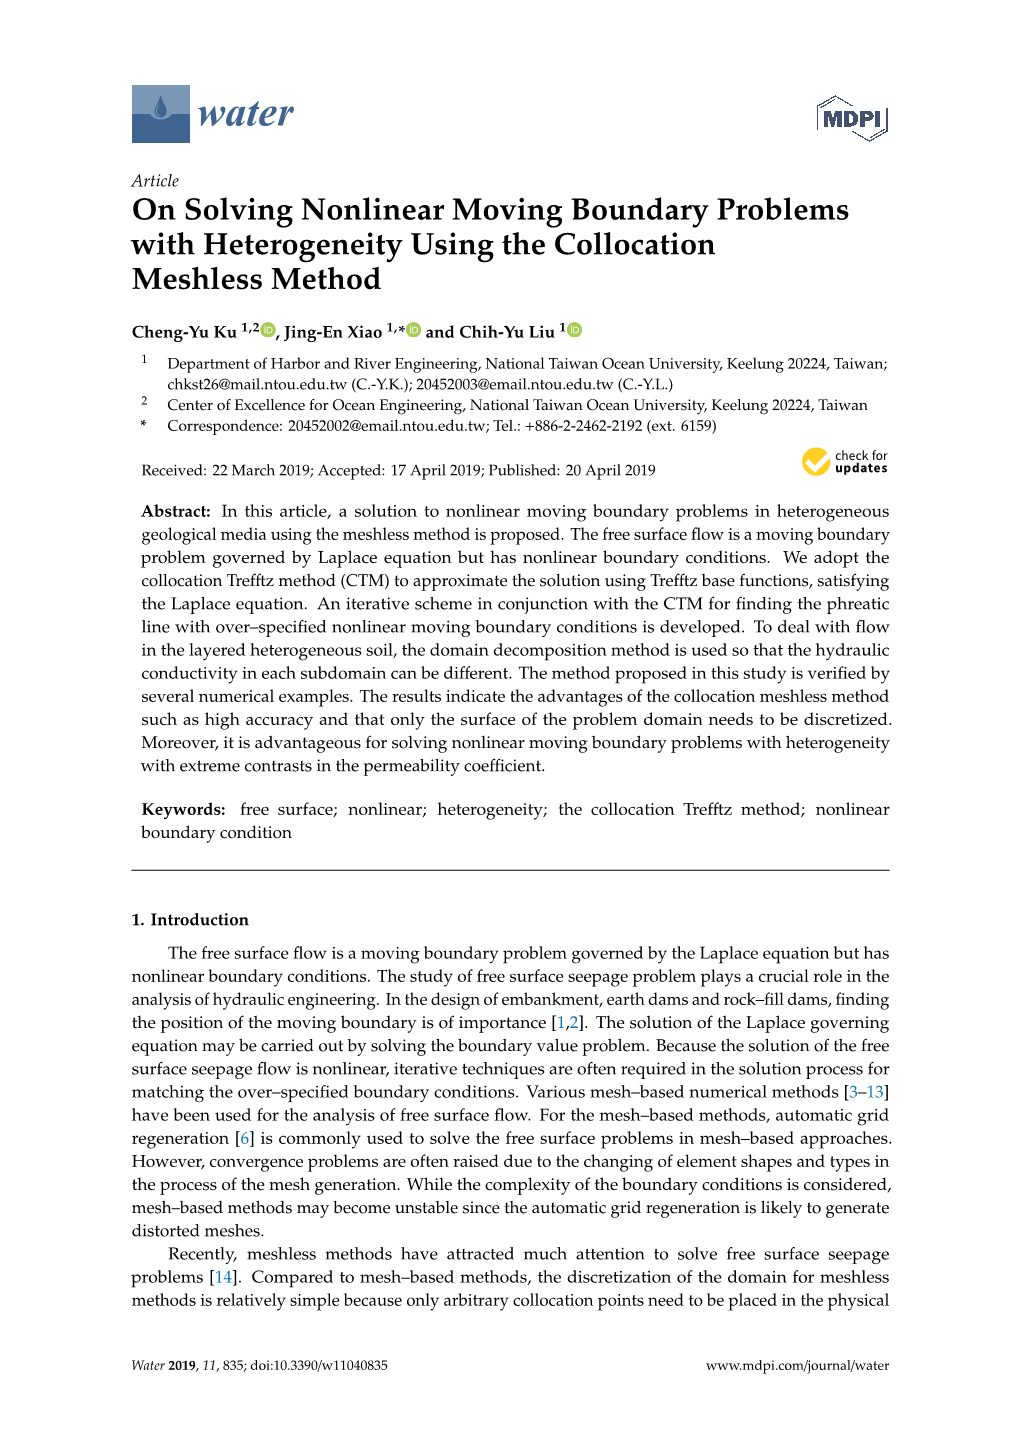 On Solving Nonlinear Moving Boundary Problems with Heterogeneity Using the Collocation Meshless Method